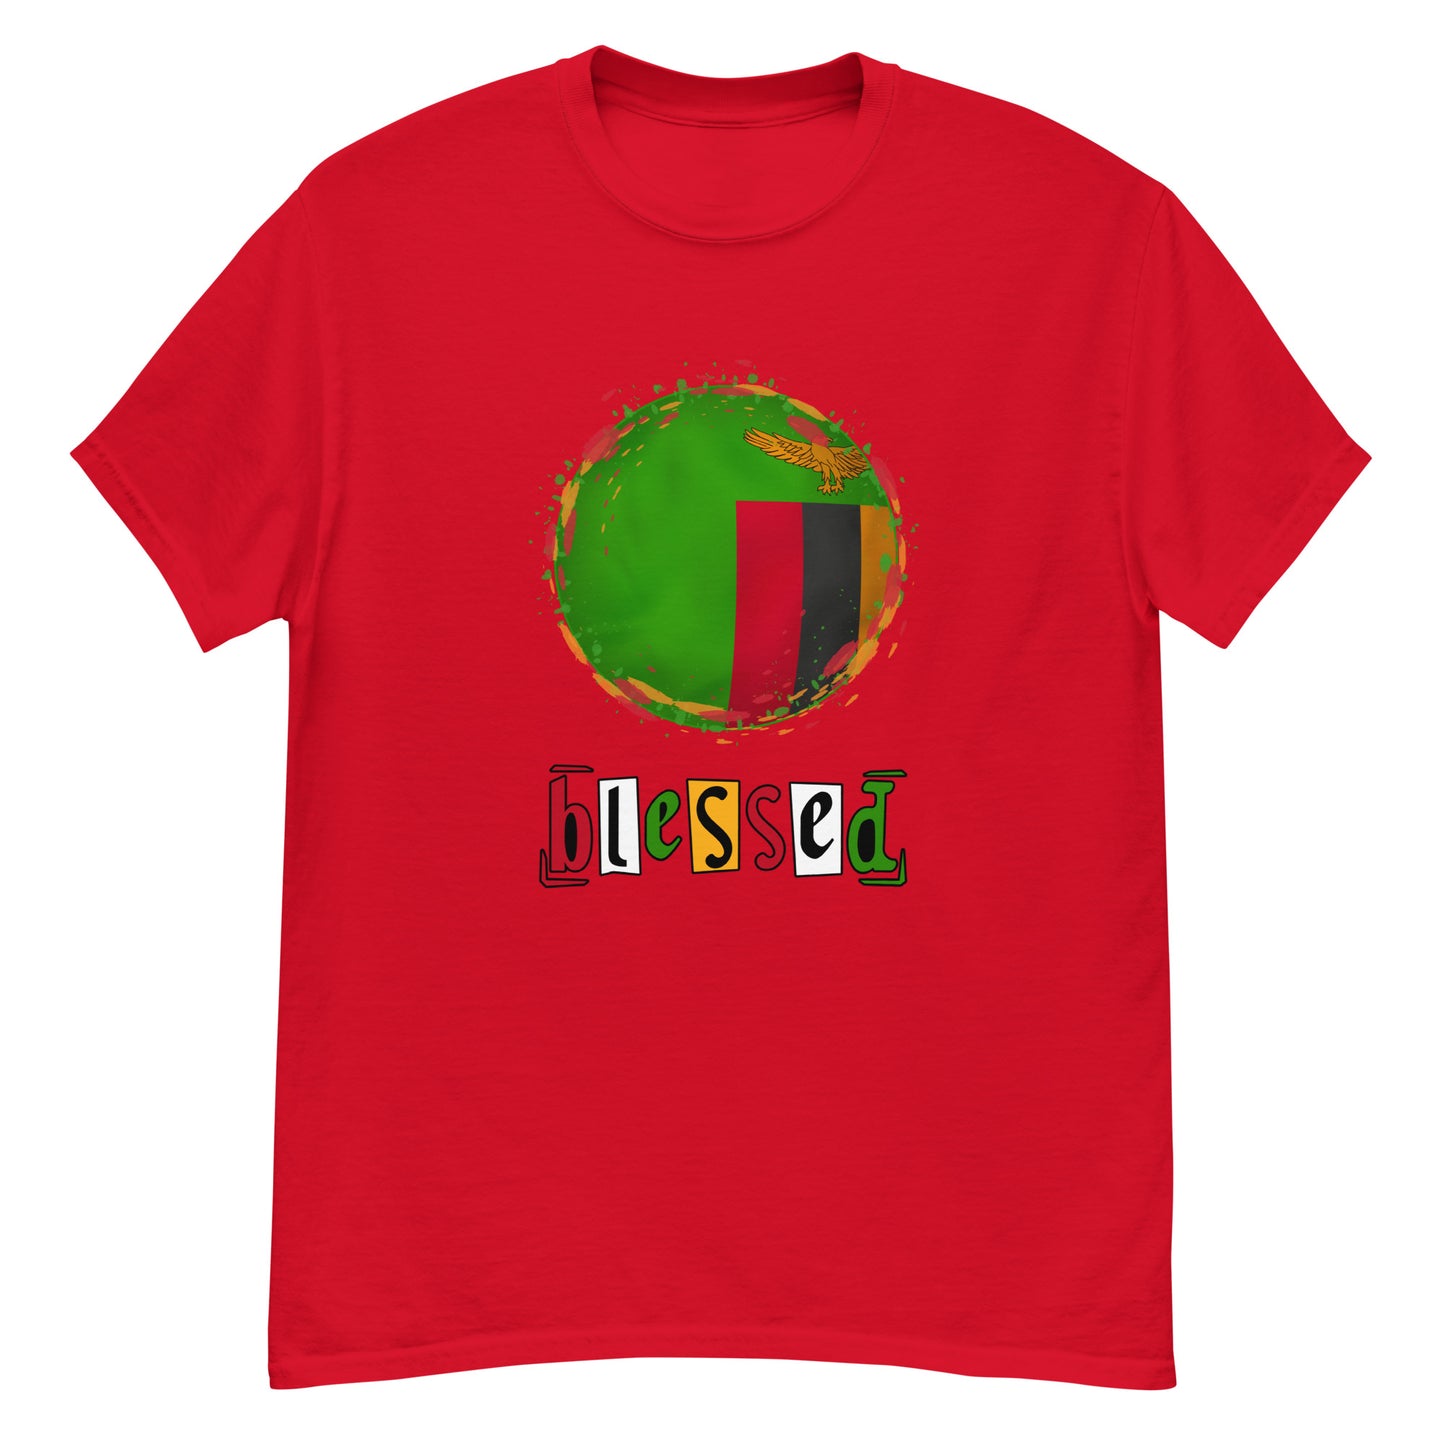 Men's classic Zambia Blessed tee